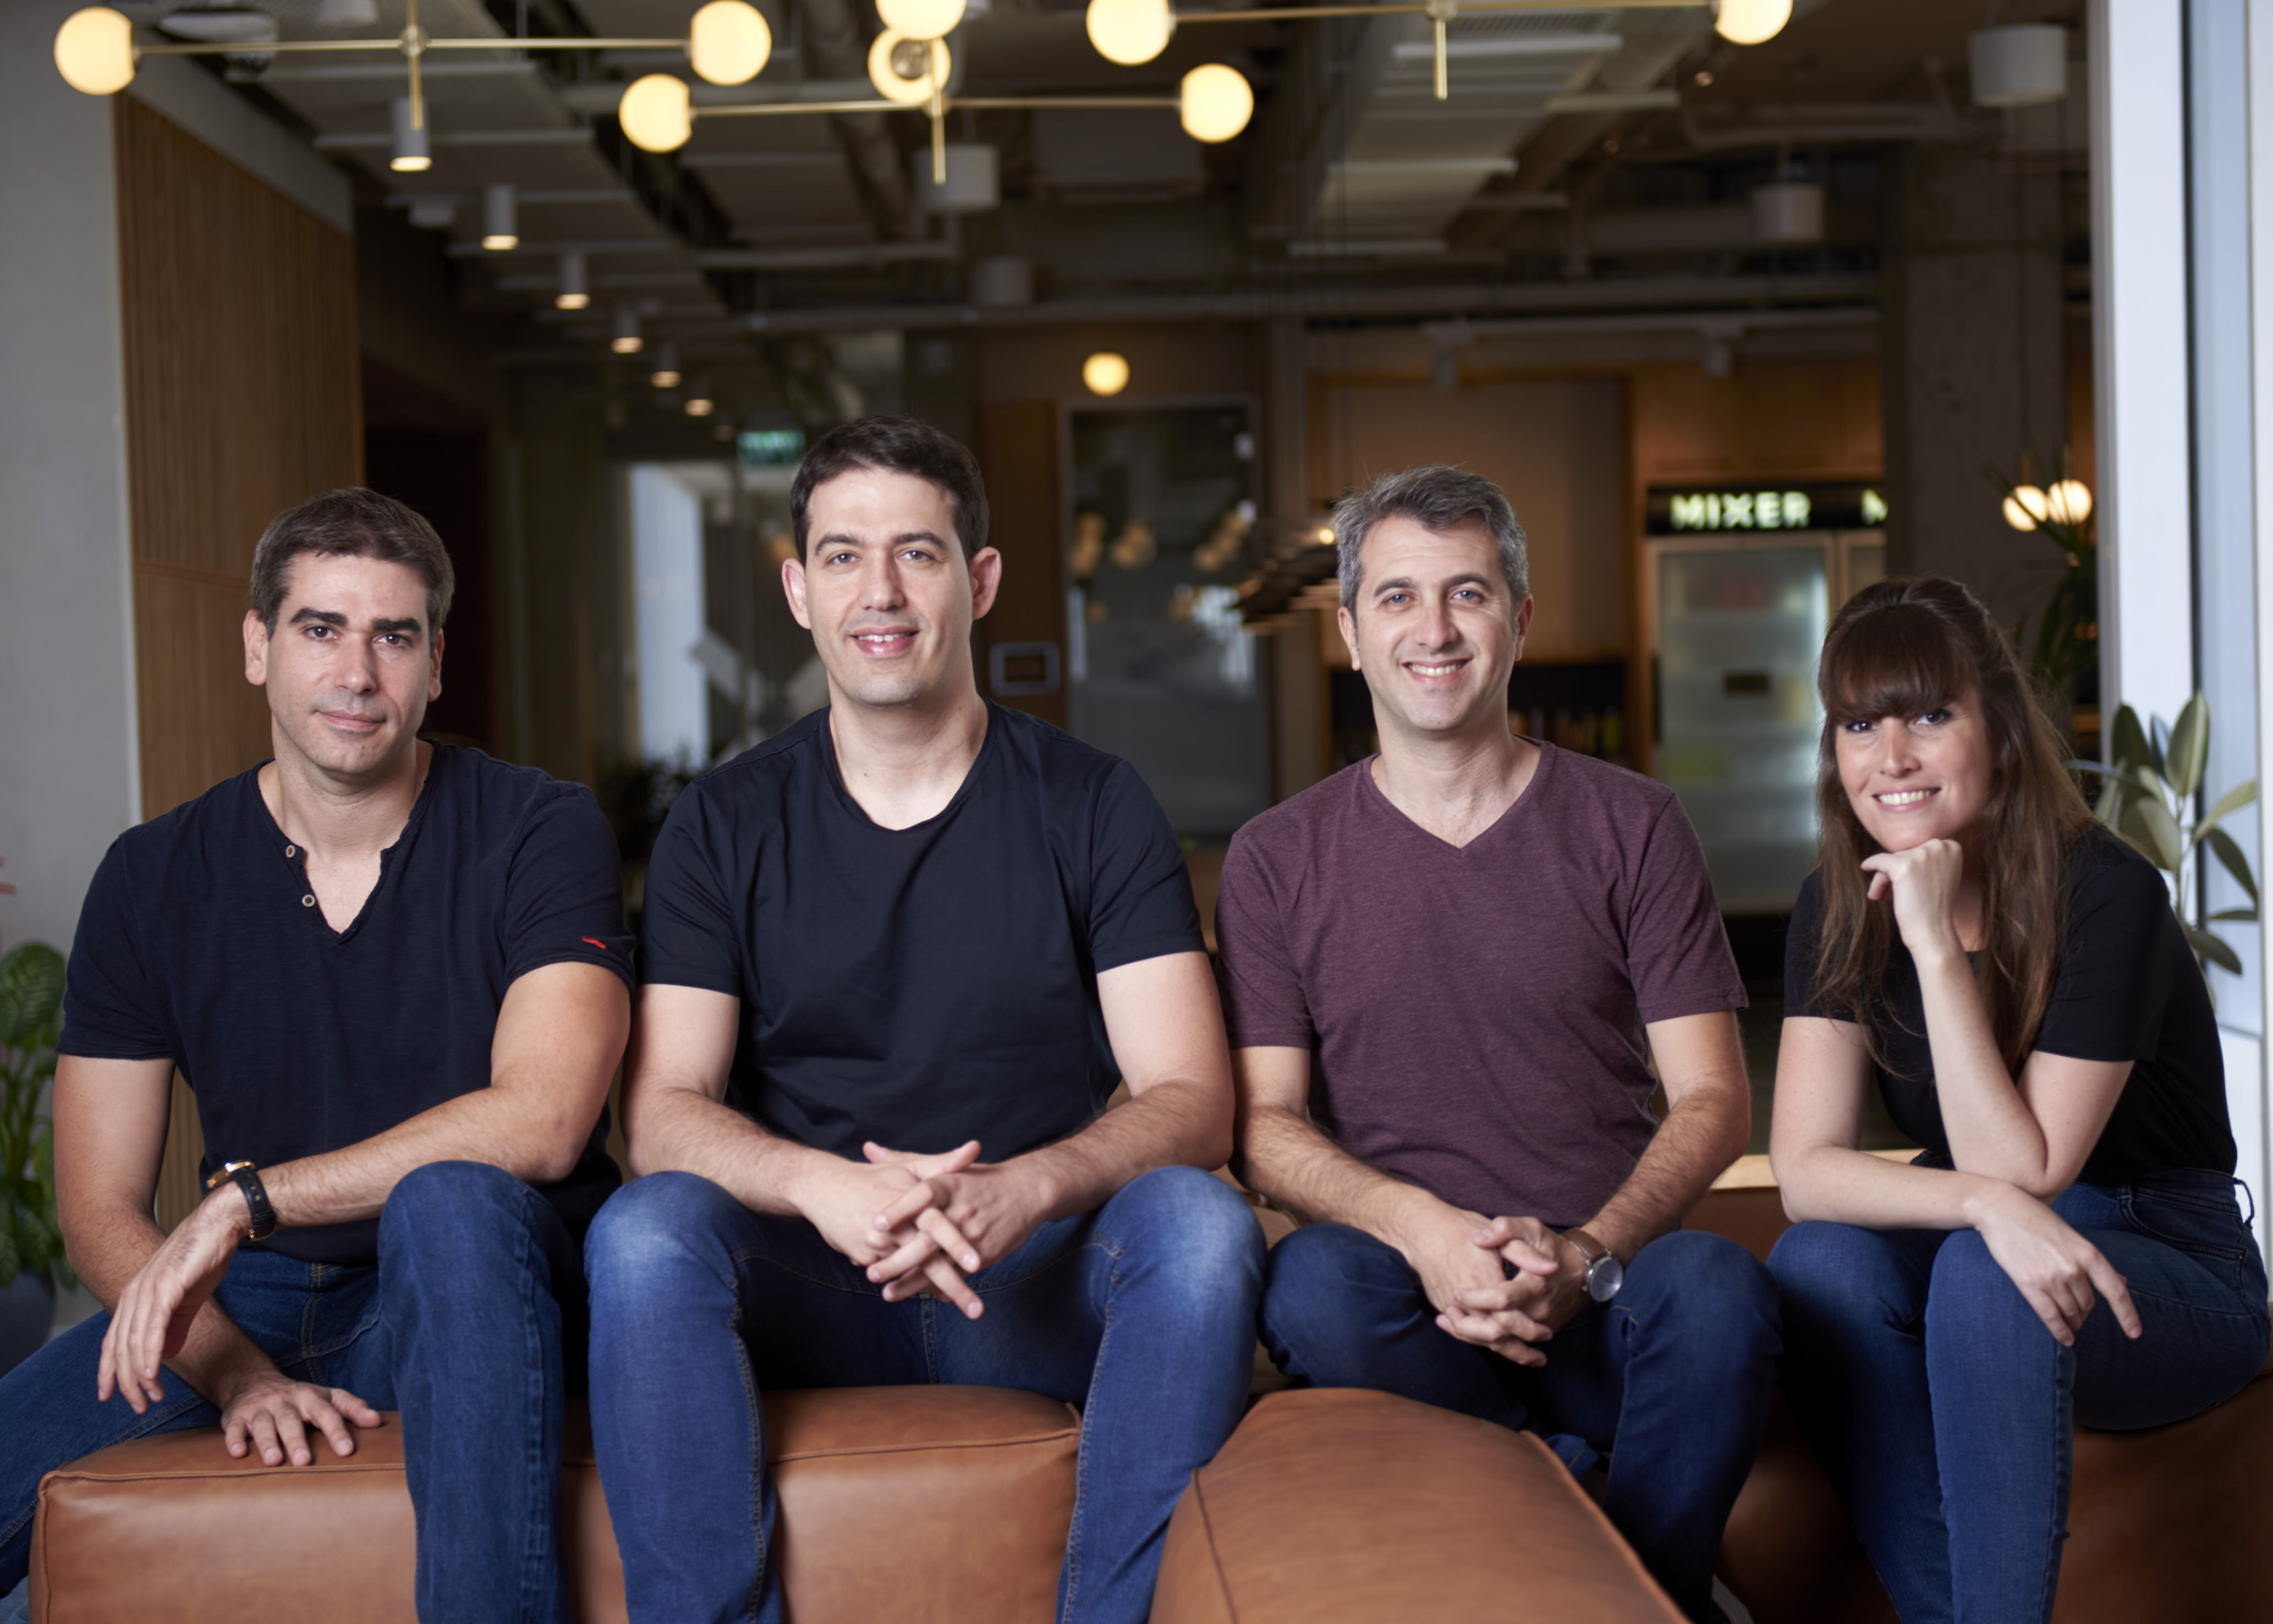 Israeli cloud security startup Ermetic raises $17 million Series A from Accel, three months after launch